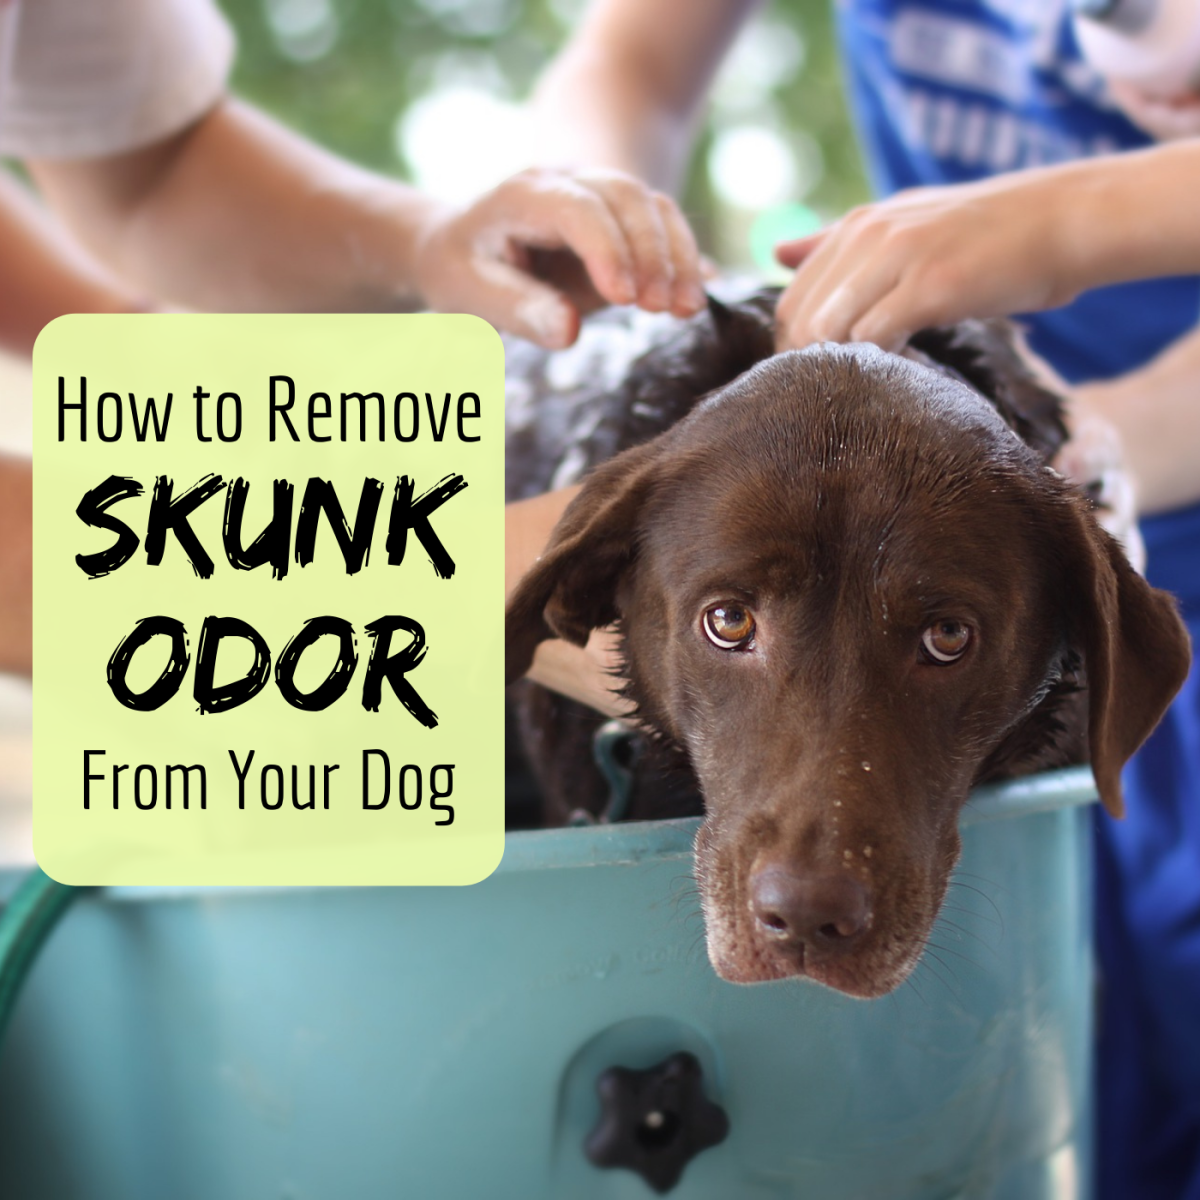 How to Remove the Skunk Odor From a Dog - PetHelpful